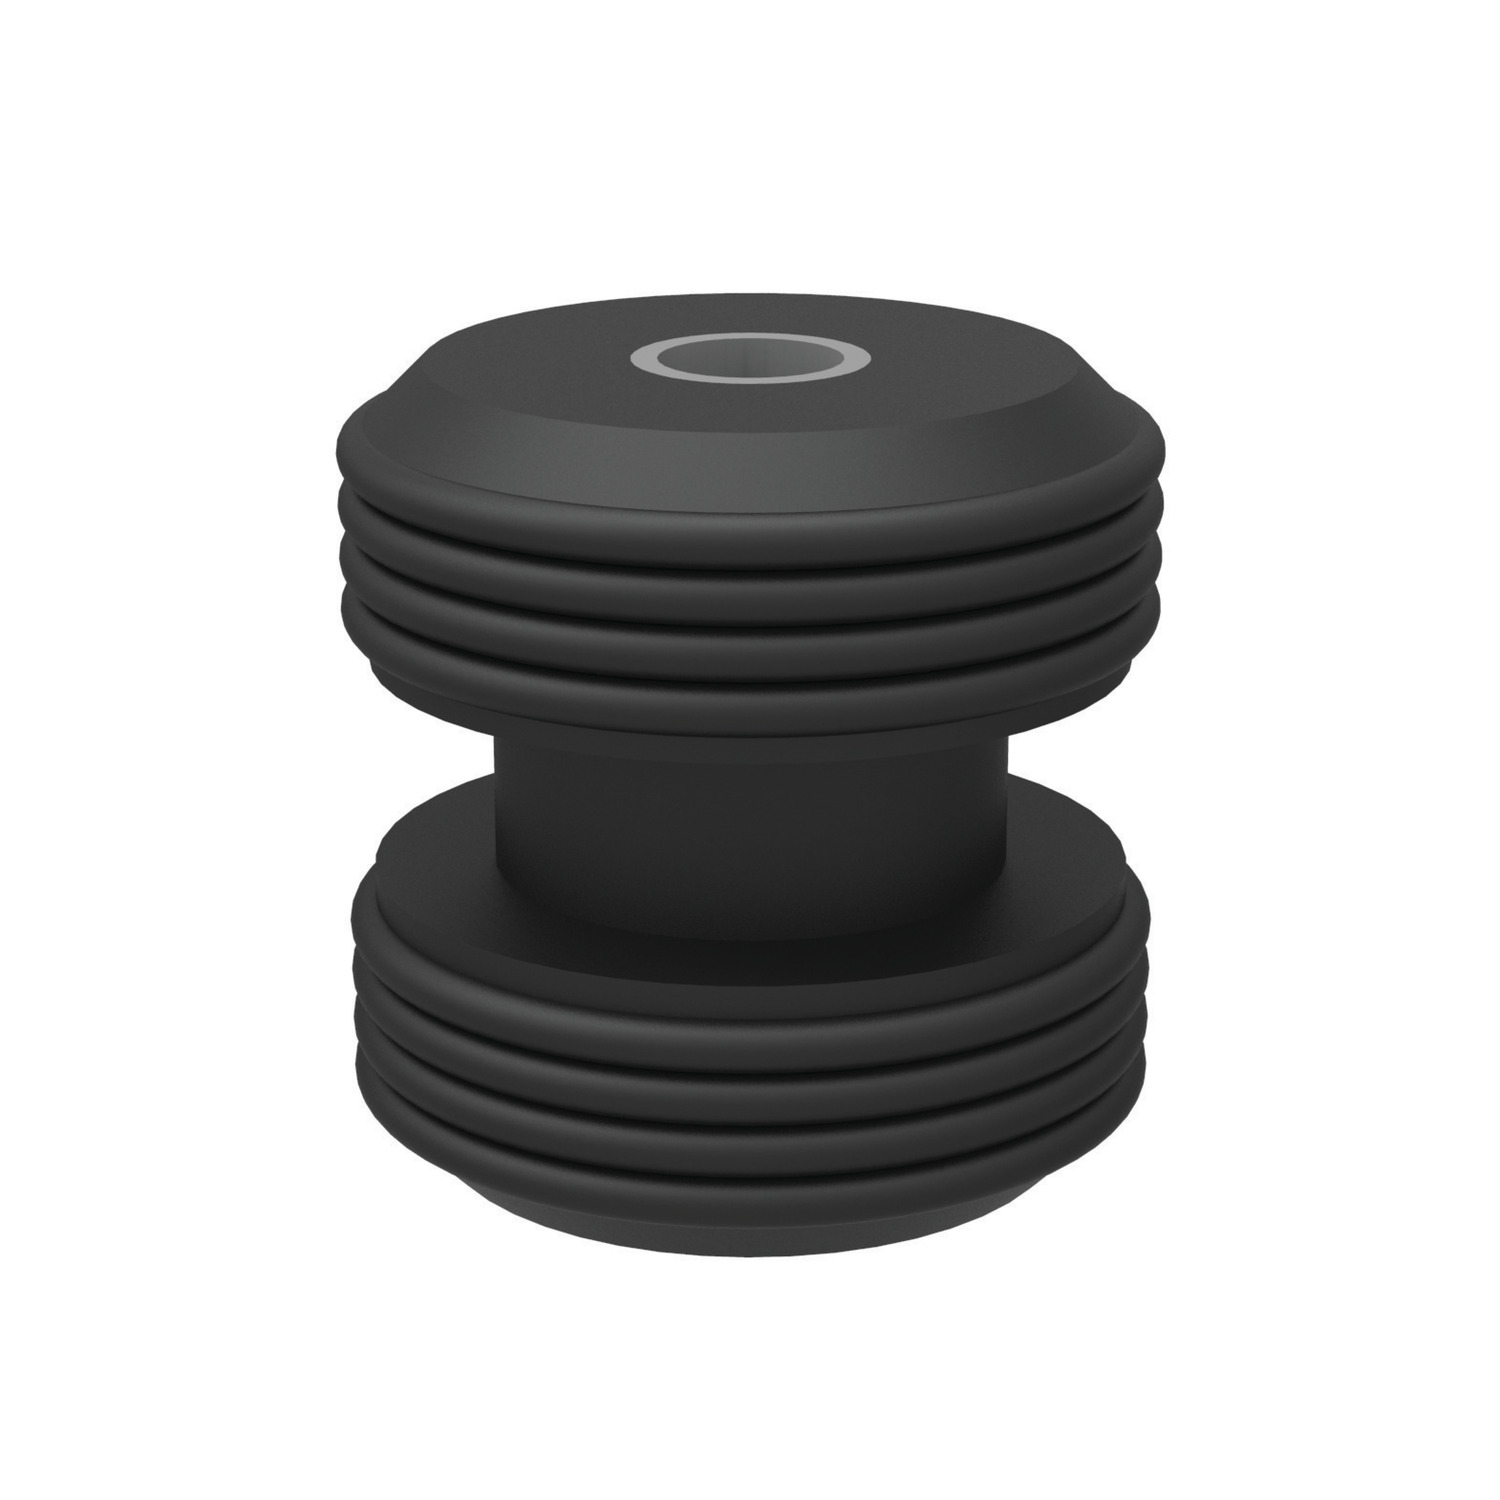 Anti-vibration Bushes This anti-vibration mount is ideal for applications of major dynamic loads where movement control is necessary.